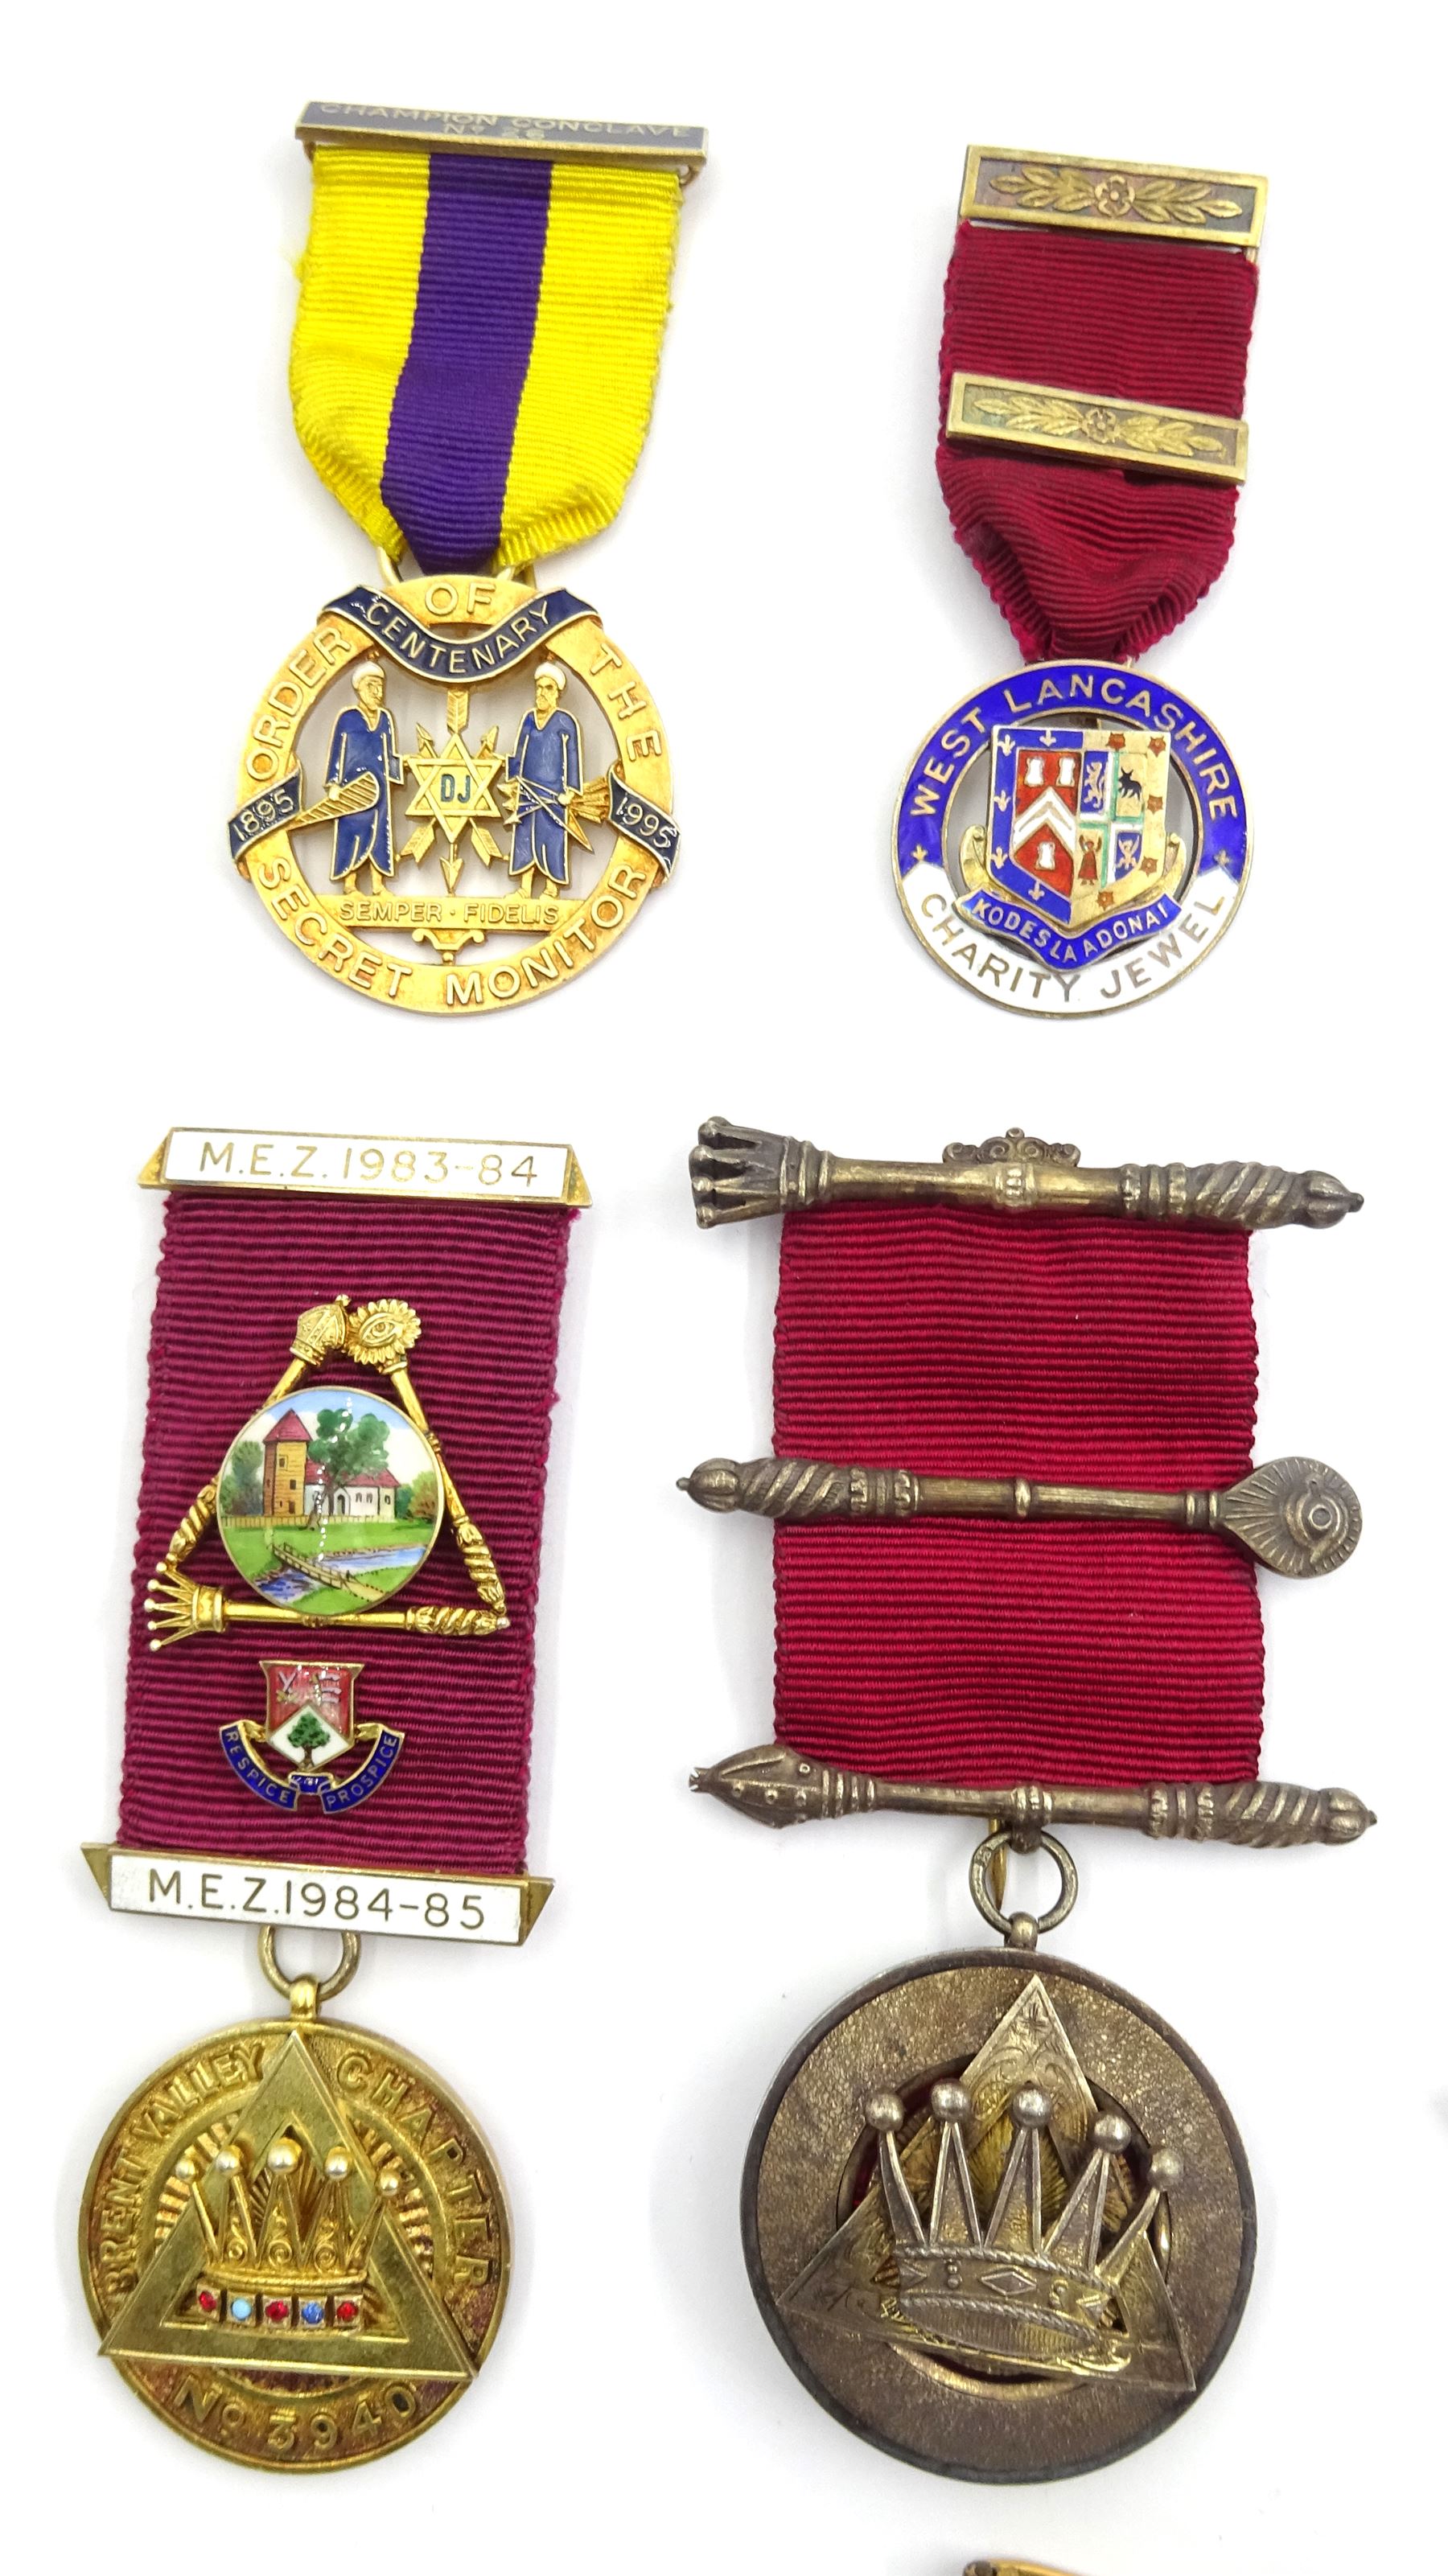 Thirteen Masonic and similar jewels / medals - Image 2 of 5